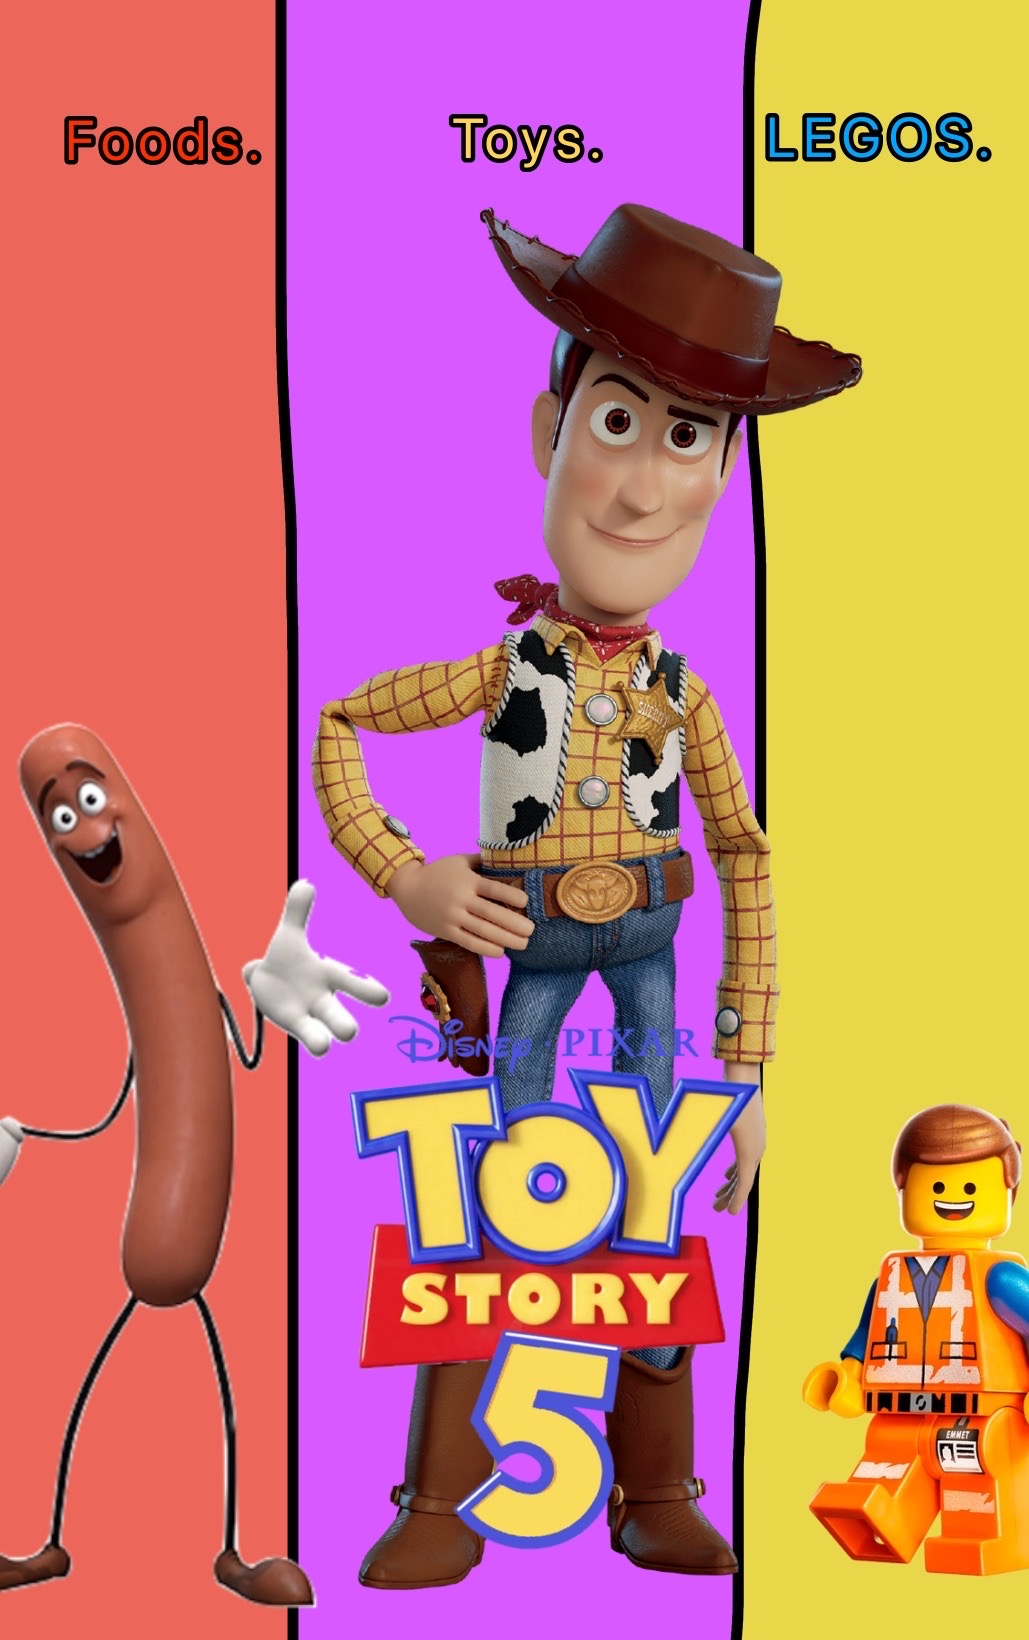 Toy Story 5 Pitch 2 by Papermariofan1 on DeviantArt